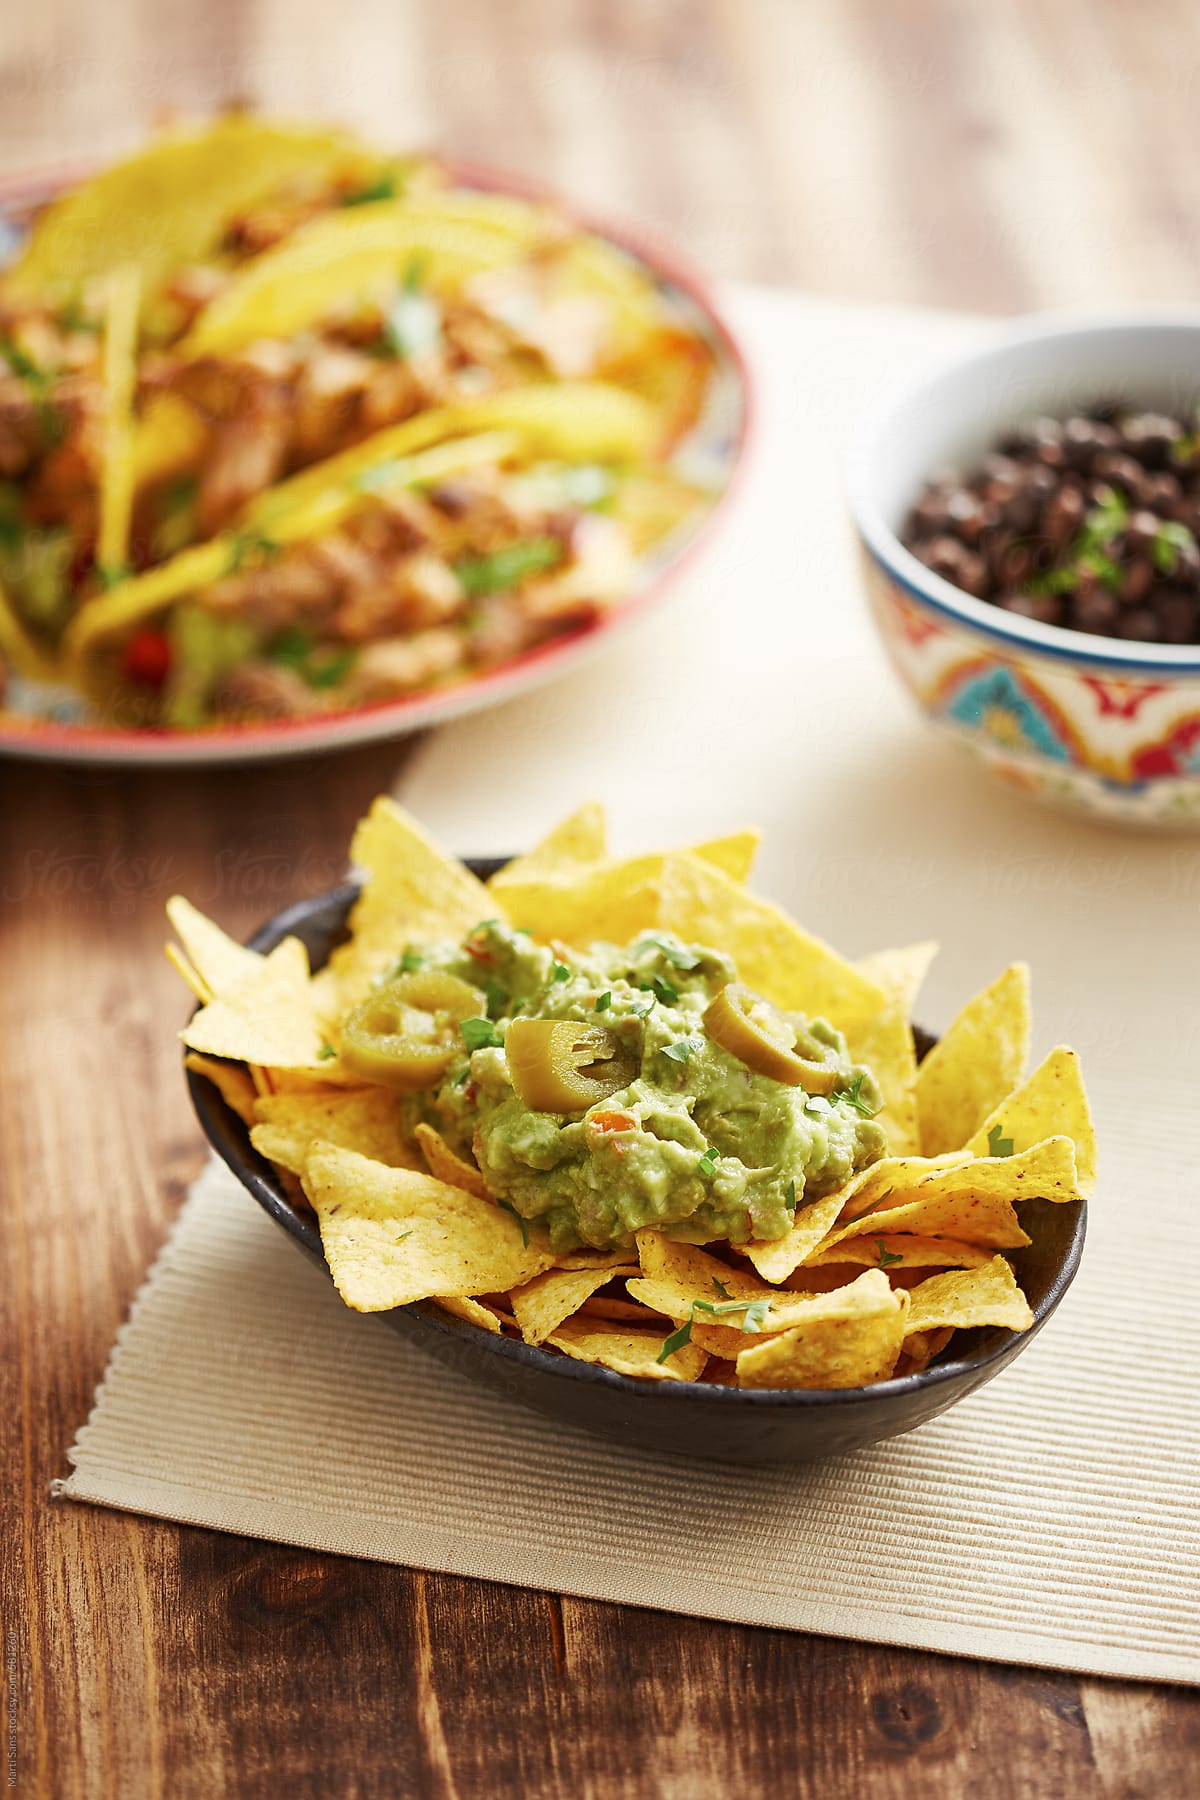 Tortilla chips with guacamole sauce, tacos, frijoles